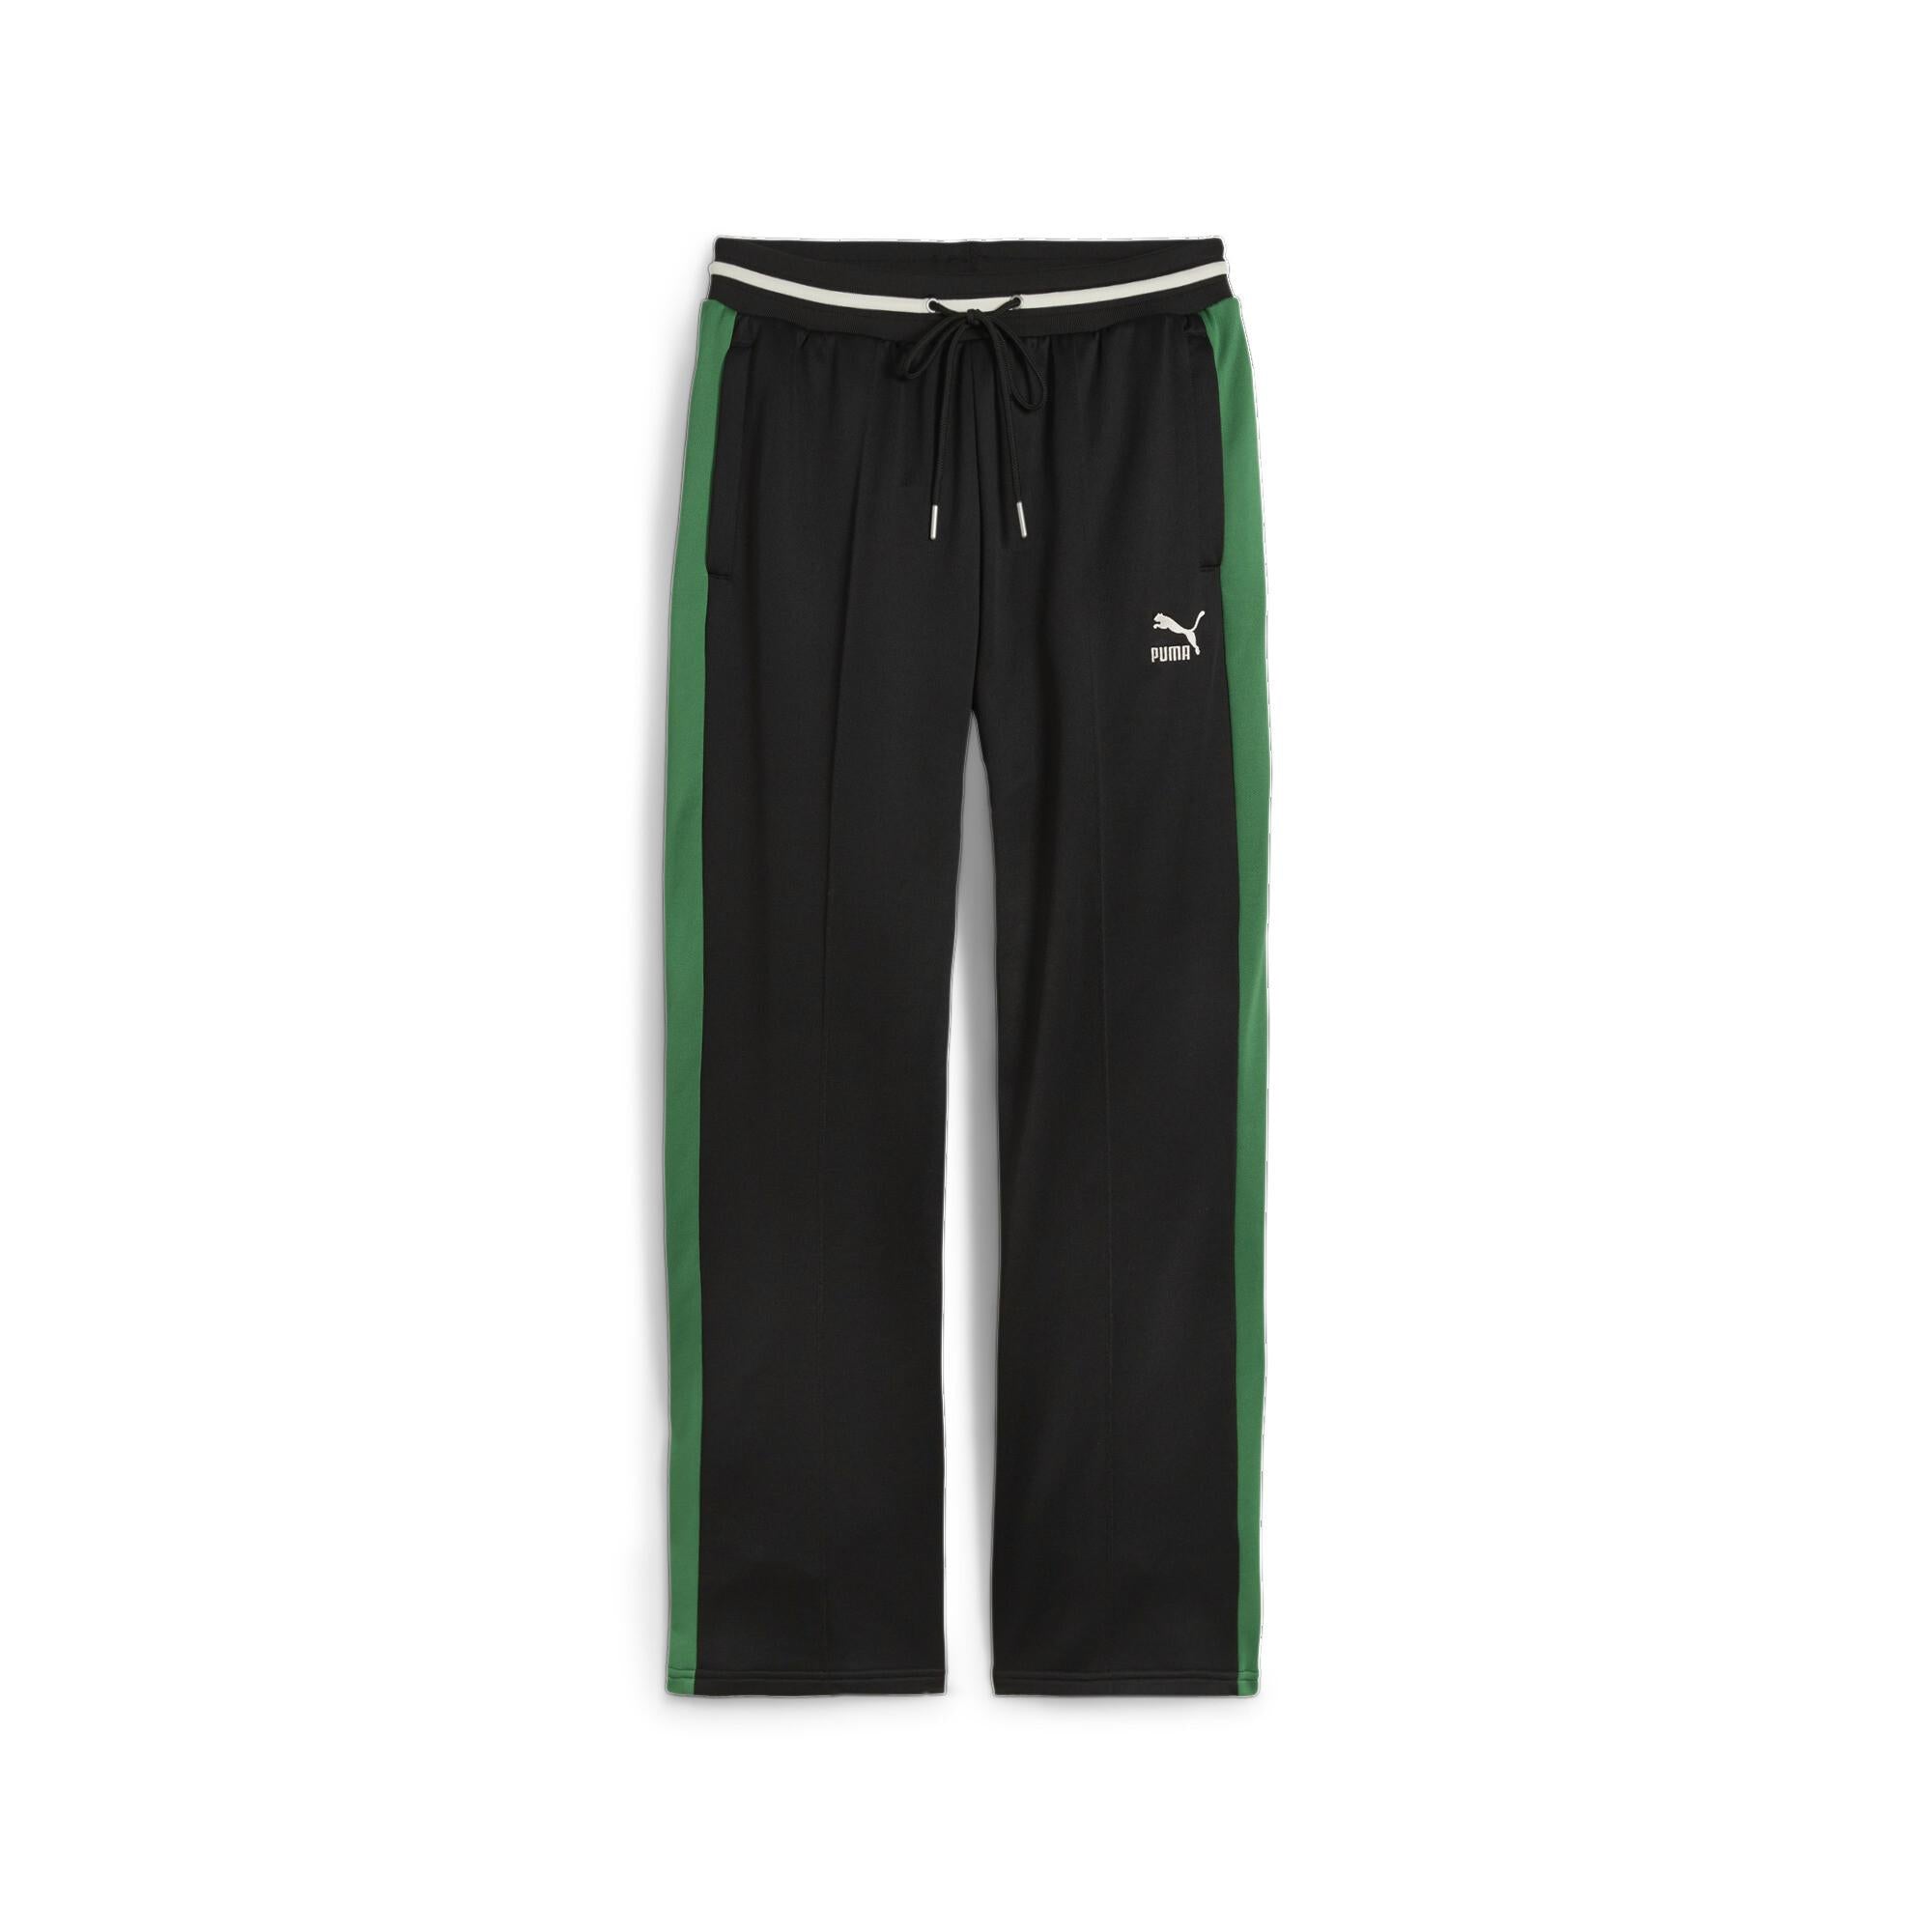 FOR THE FANBASE T7 TRACK PANTS